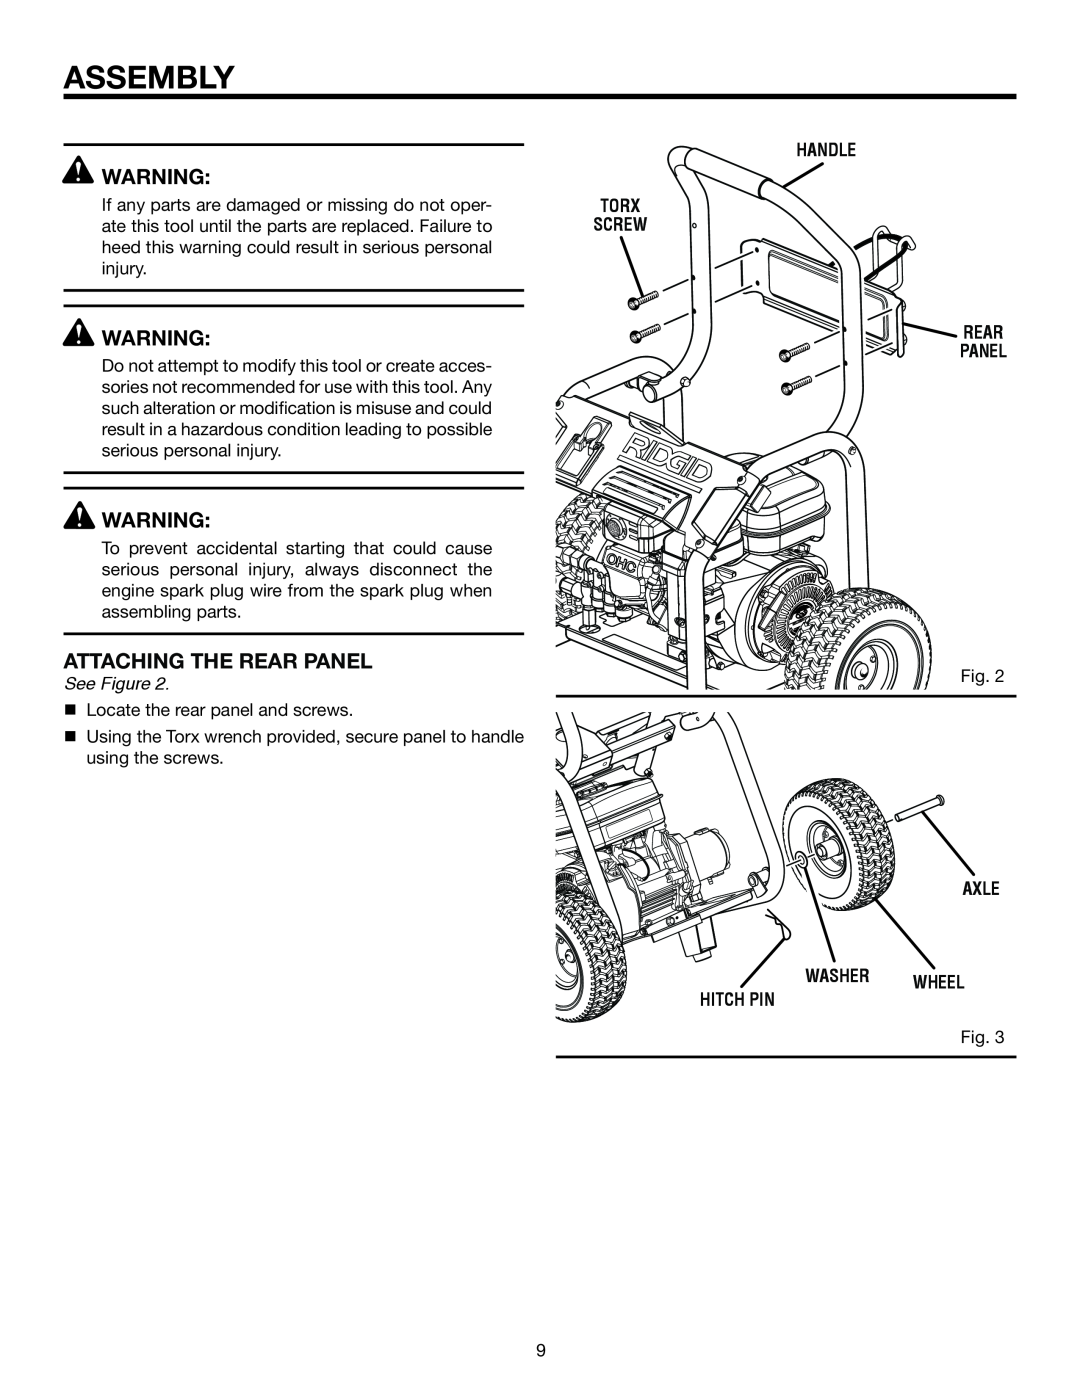 RIDGID RD80763 attaching the rear panel, handle torx screw rear panel, AXLE WASHER wheel hitch pin, Assembly, See Figure 